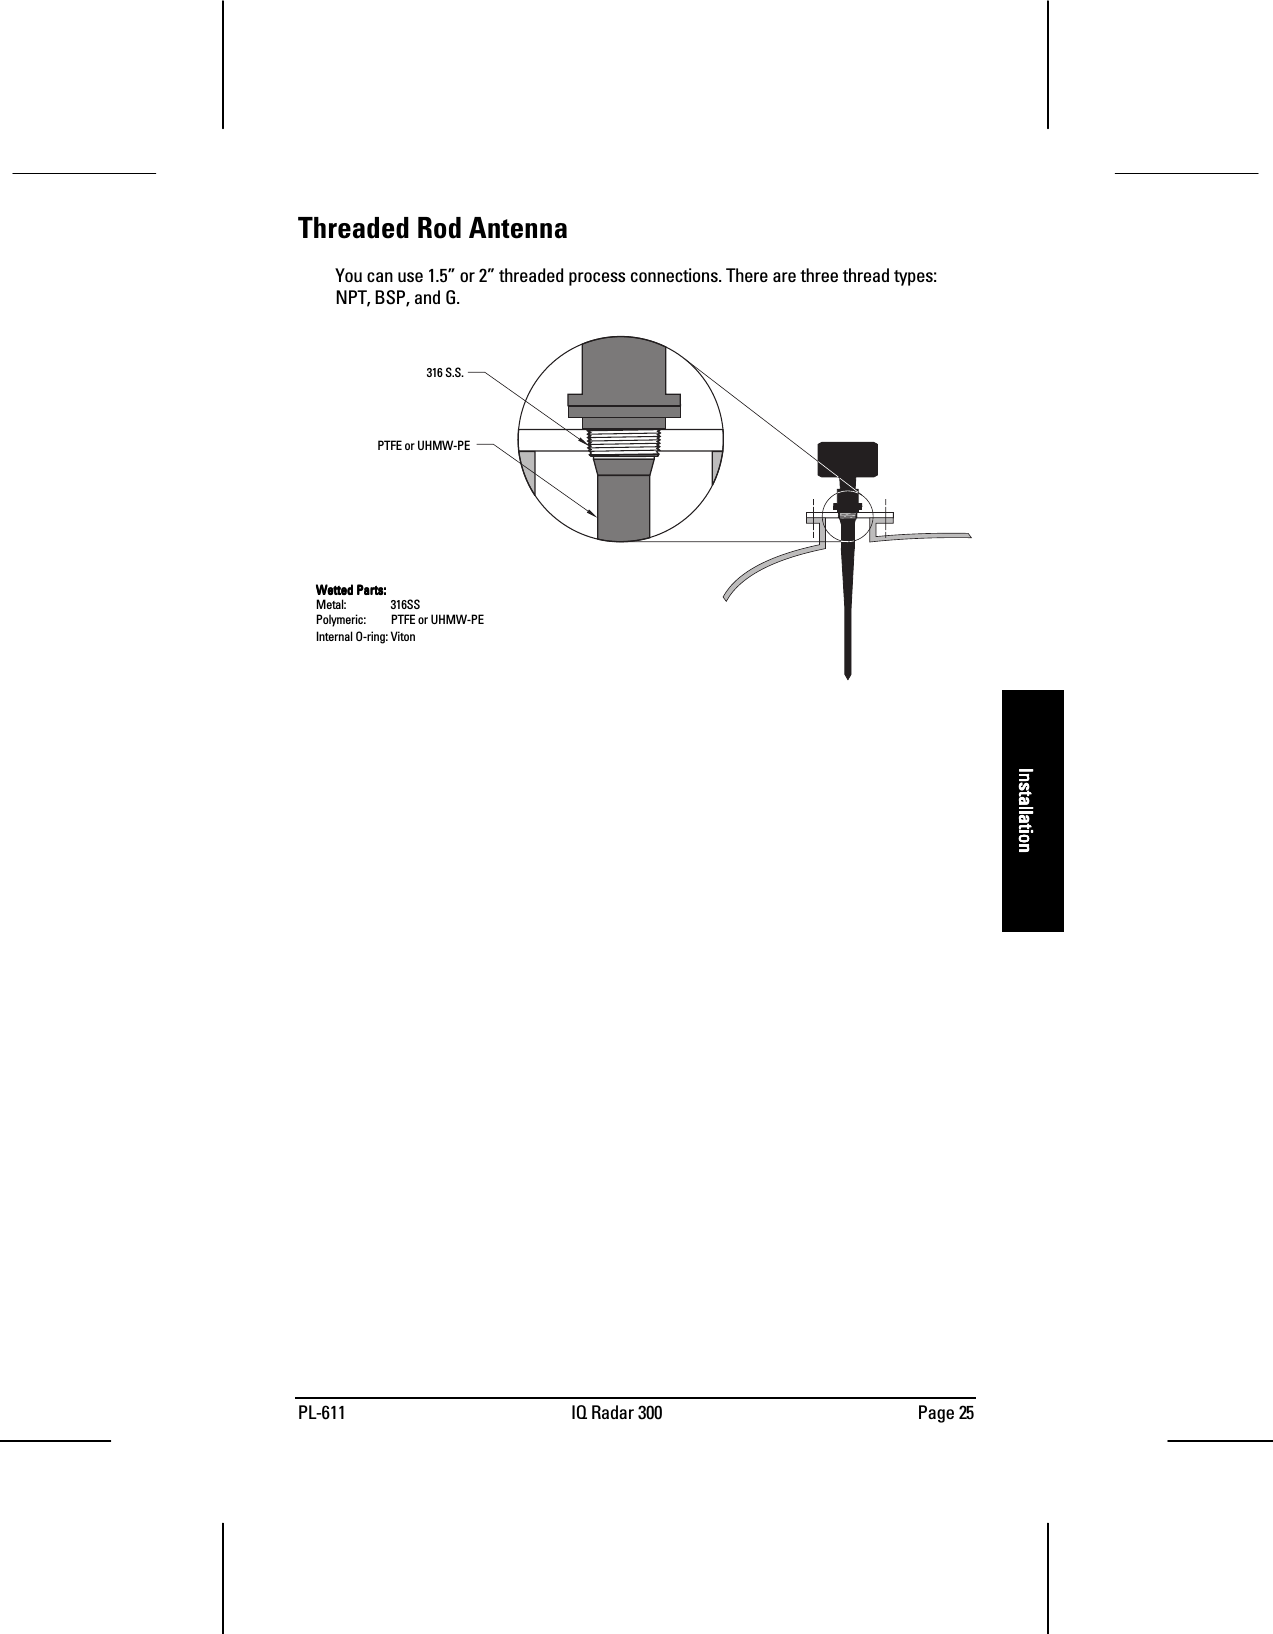 PL-611 IQ Radar 300 Page 25InstallationInstallationInstallationInstallationThreaded Rod AntennaYou can use 1.5” or 2” threaded process connections. There are three thread types:NPT, BSP, and G.Wetted Parts:Wetted Parts:Wetted Parts:Wetted Parts:Metal: 316SSPolymeric:  PTFE or UHMW-PEInternal O-ring: Viton316 S.S.PTFE or UHMW-PE